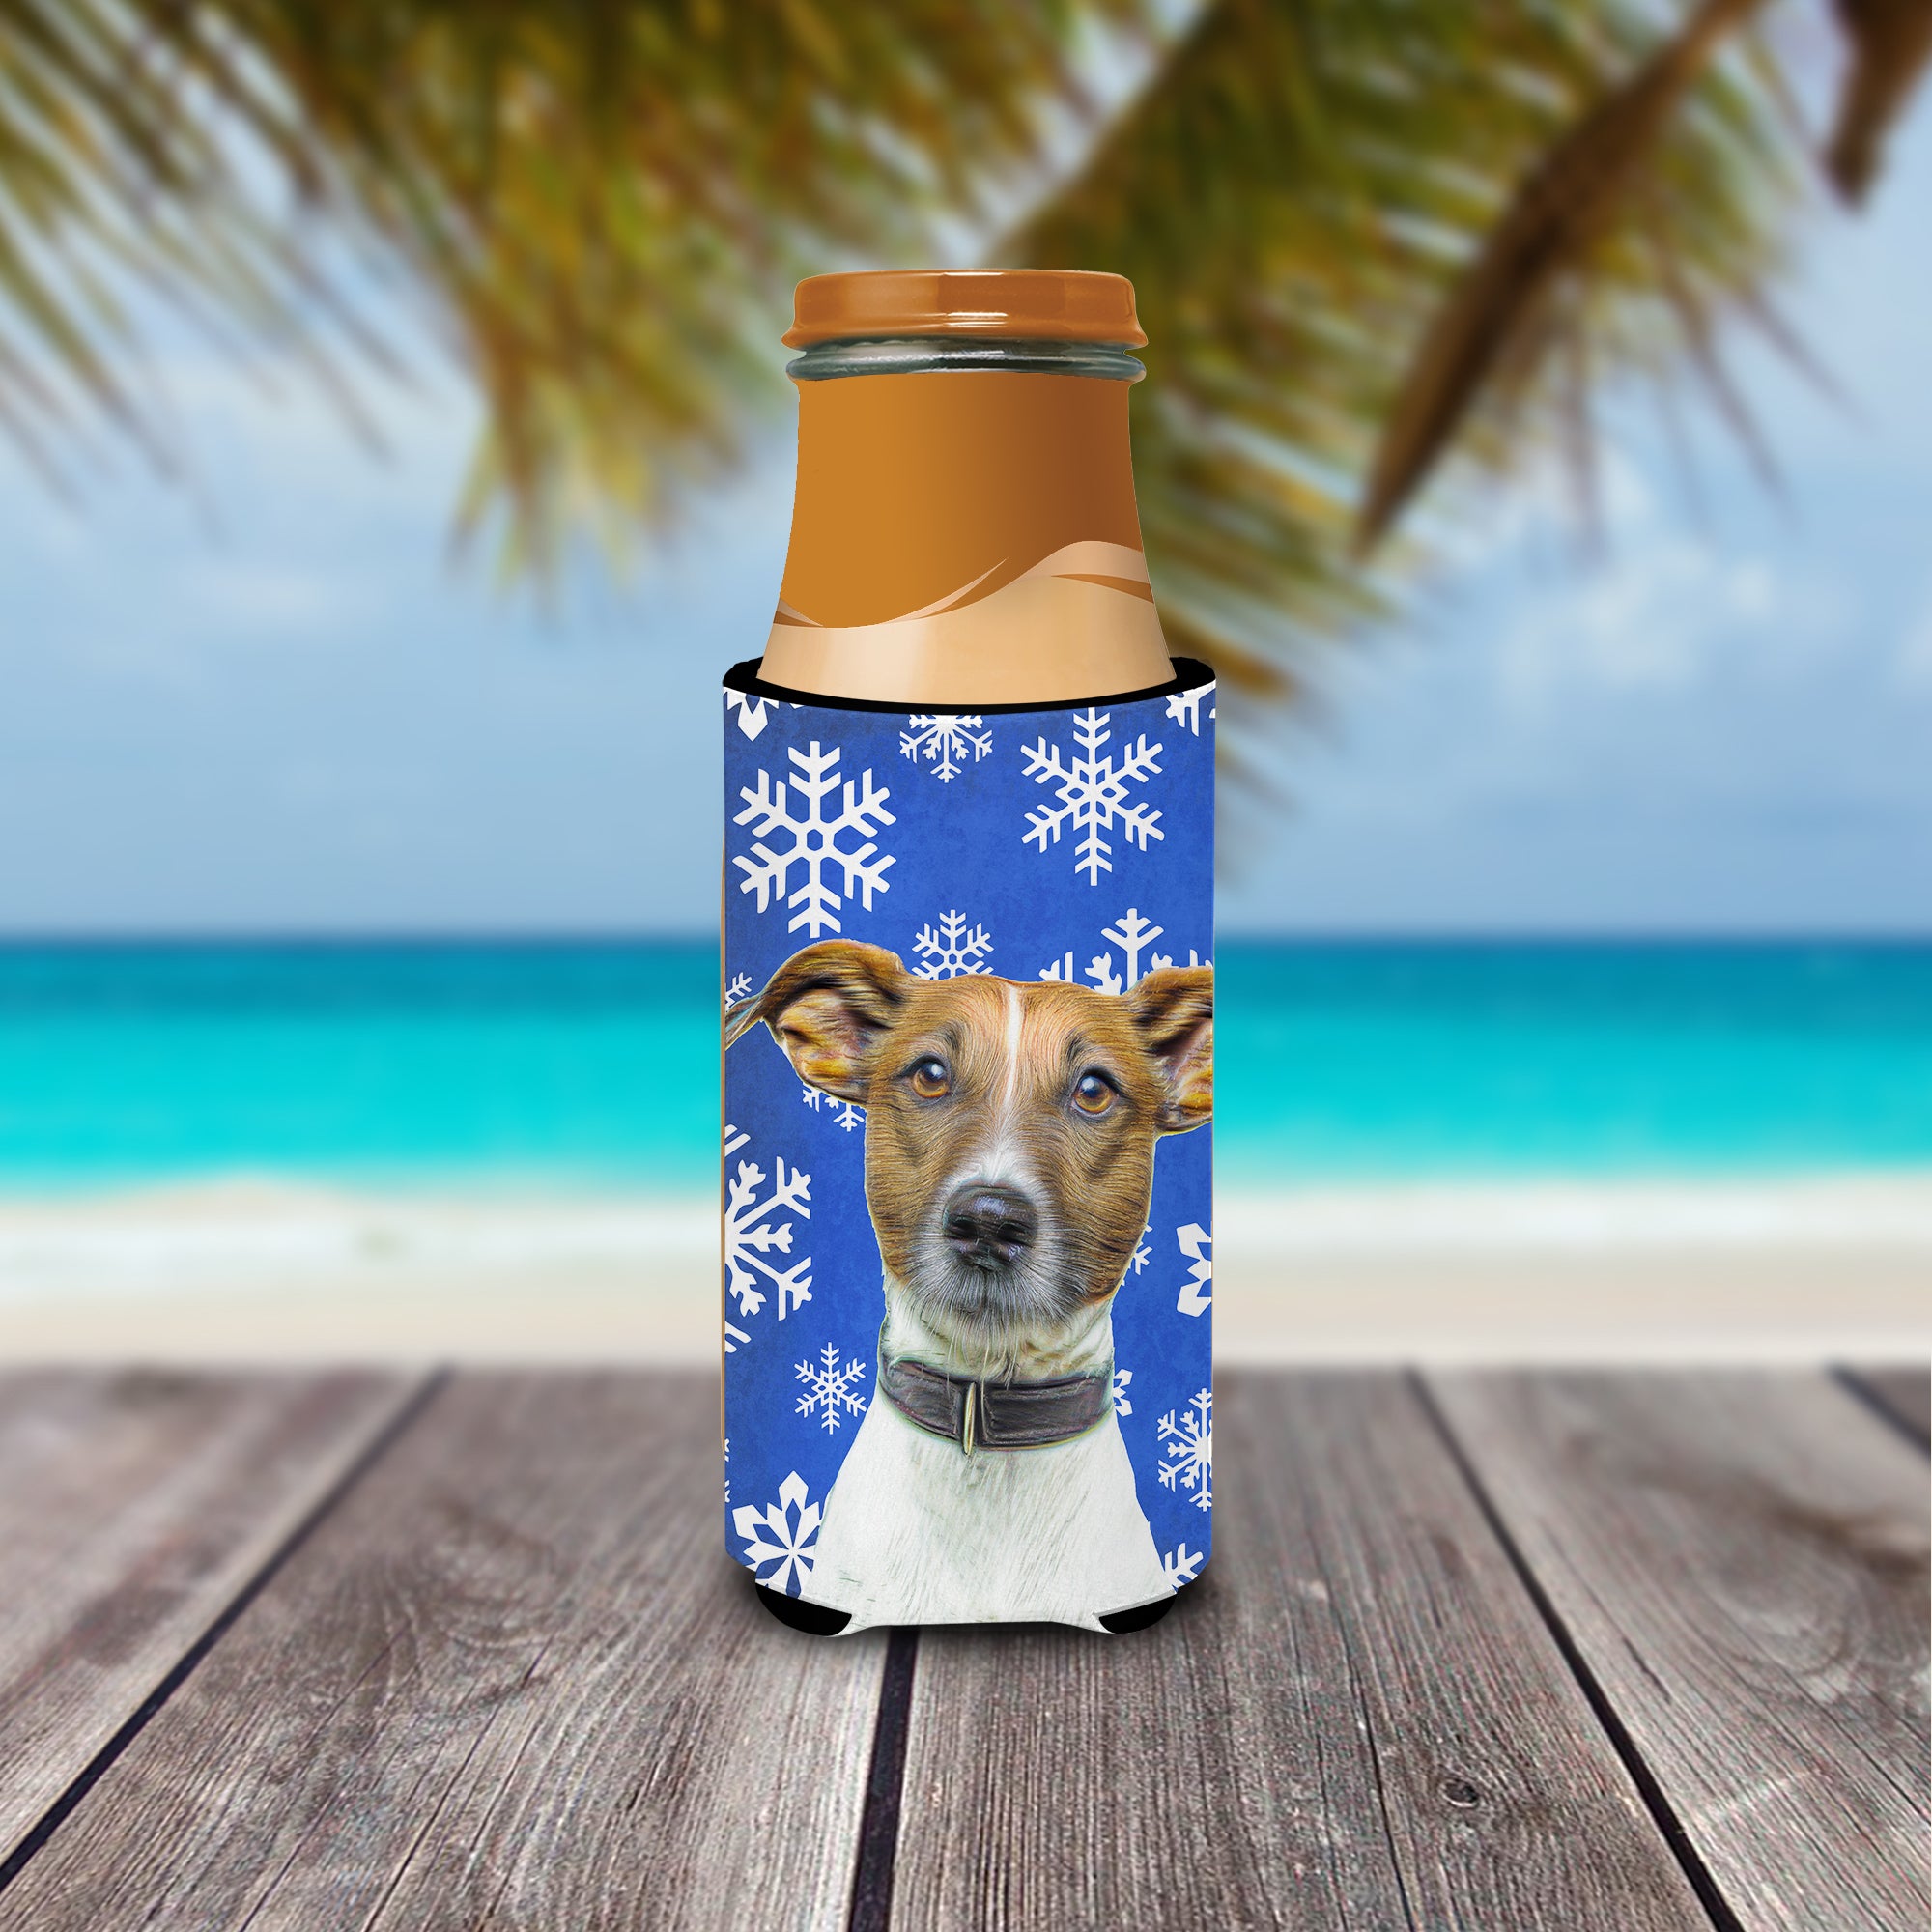 Winter Snowflakes Holiday Jack Russell Terrier Ultra Beverage Insulators for slim cans KJ1176MUK.